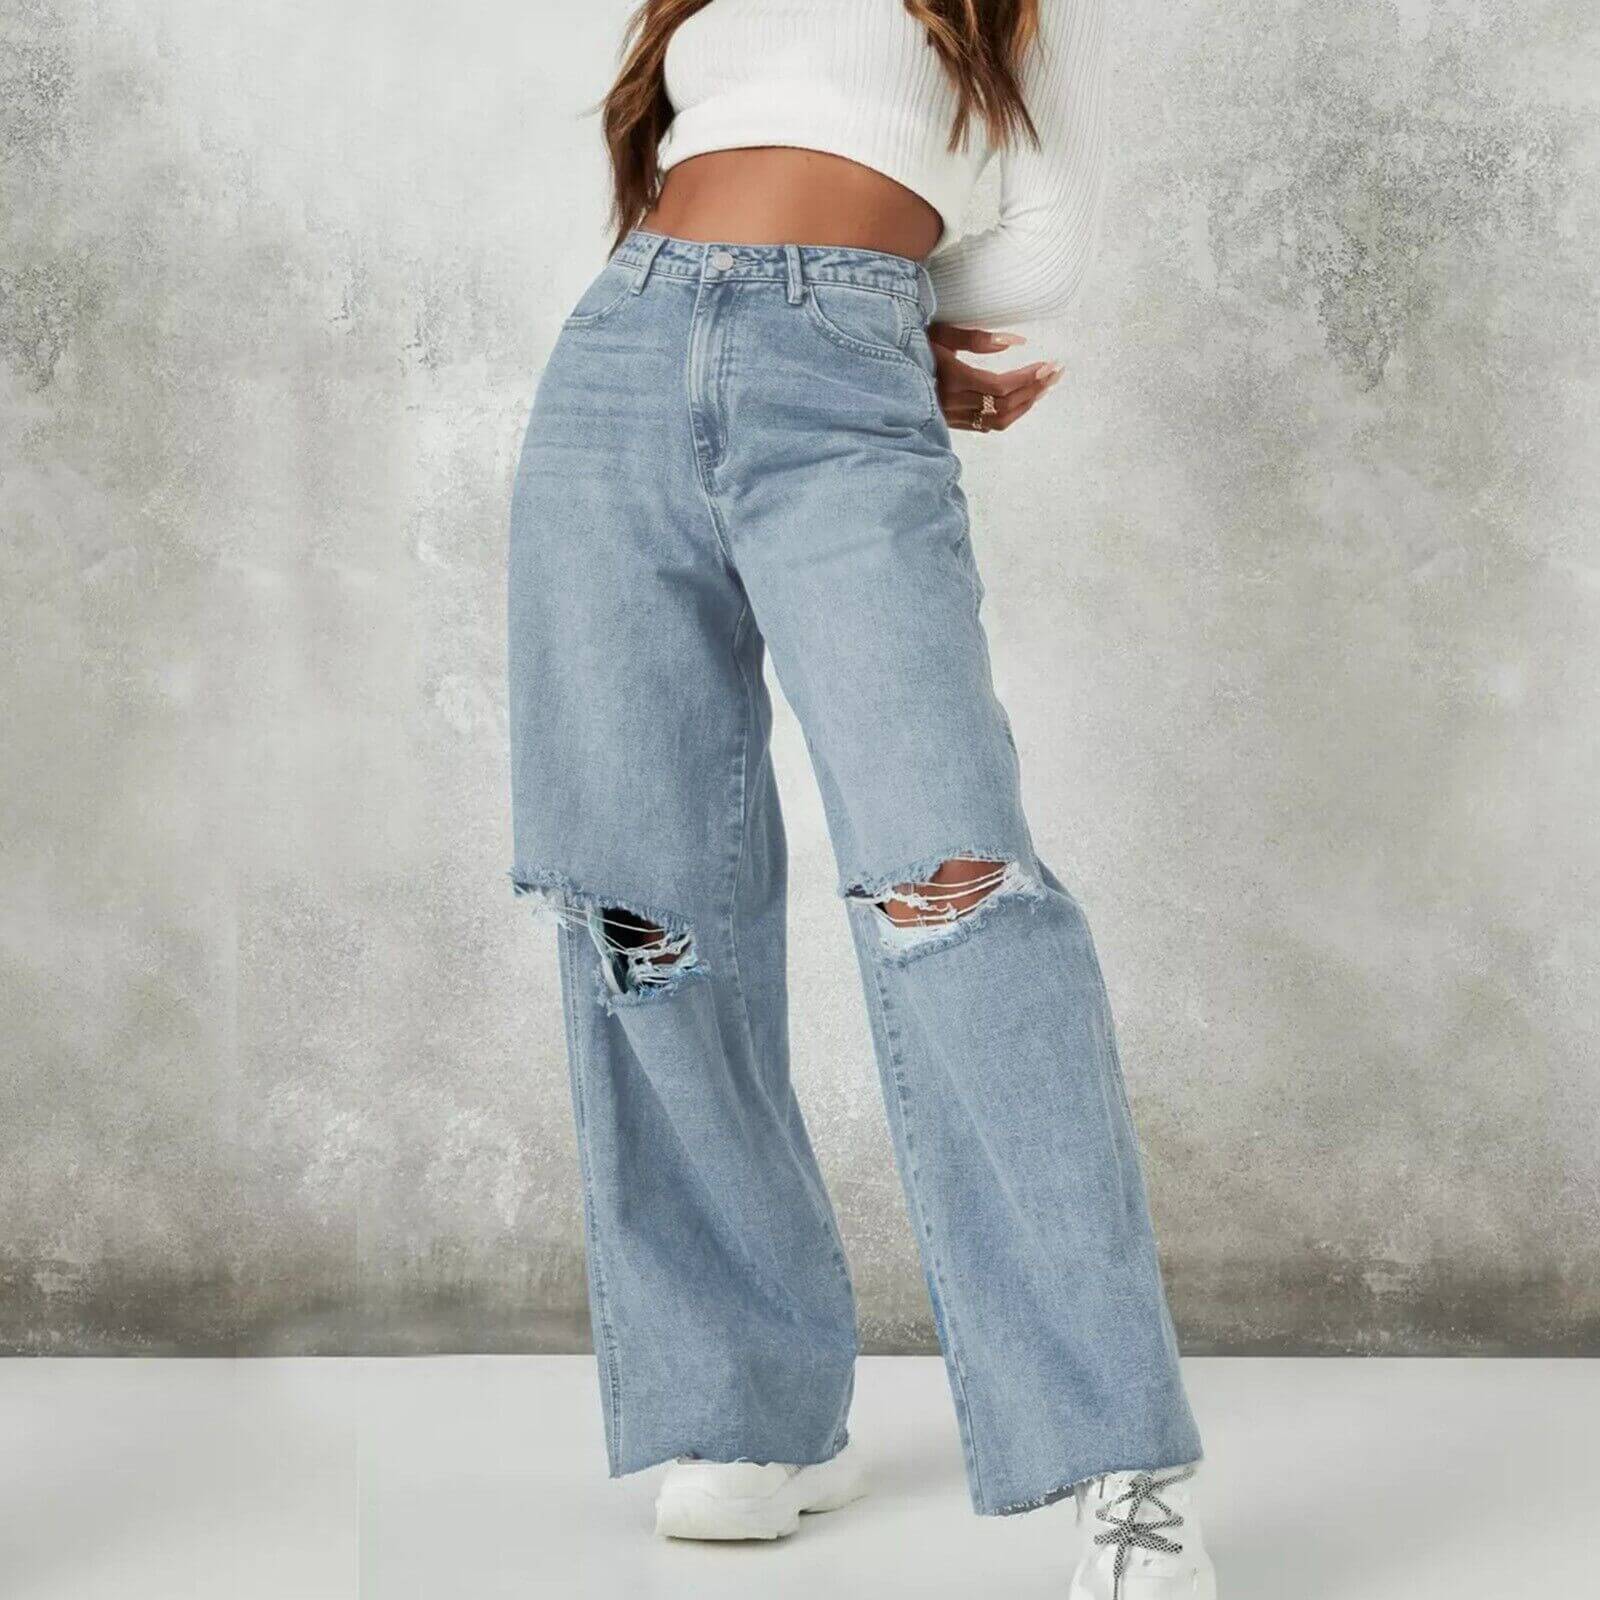 Image of jeans from eBay website